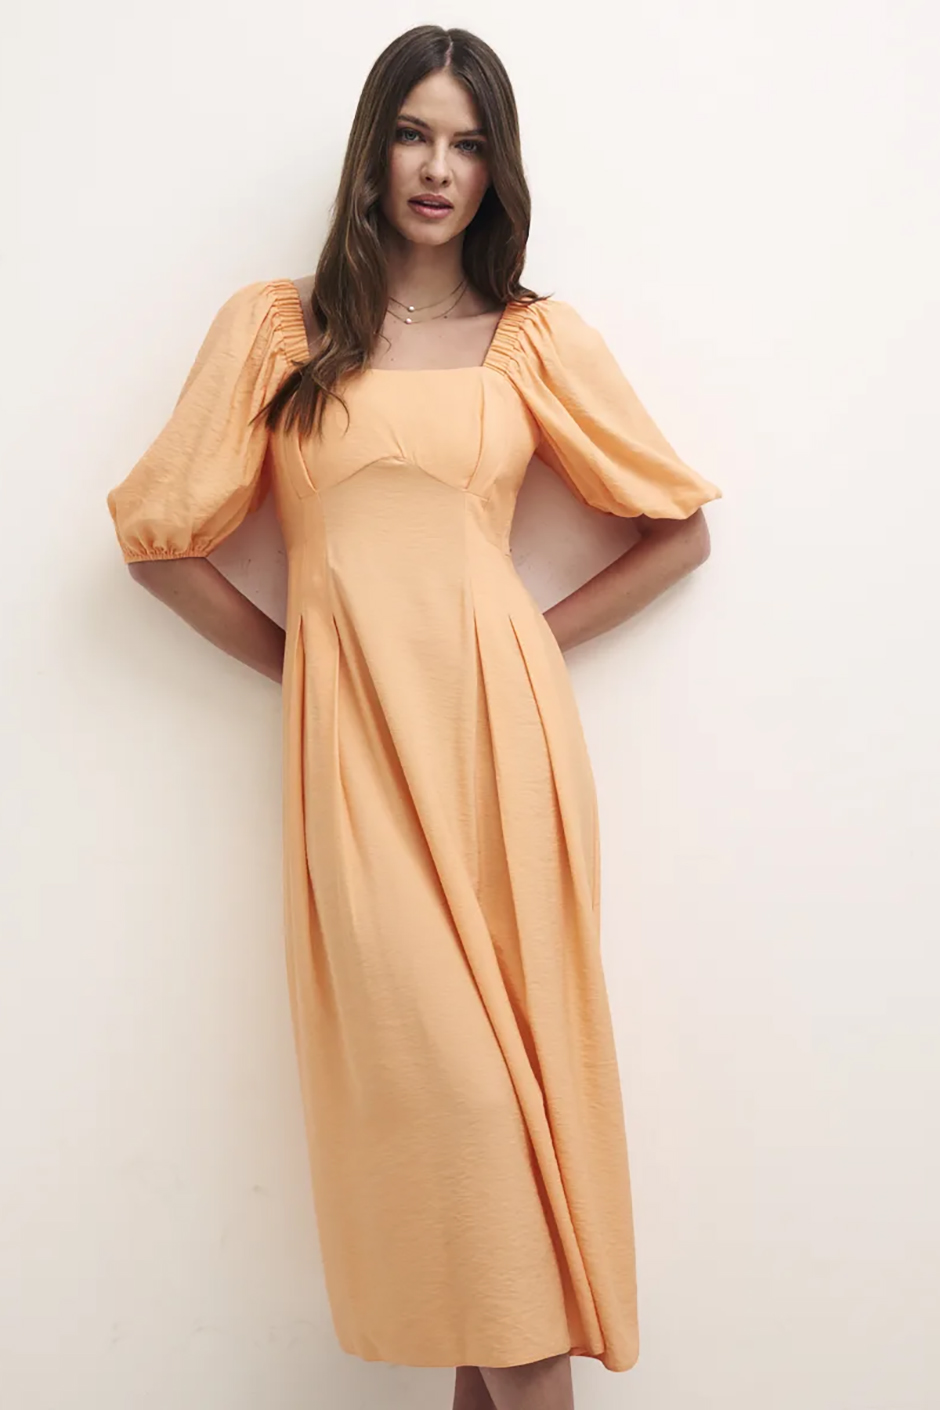 Orange peach bridesmaid dress from Nobody's Child with puff sleeves and midi length 